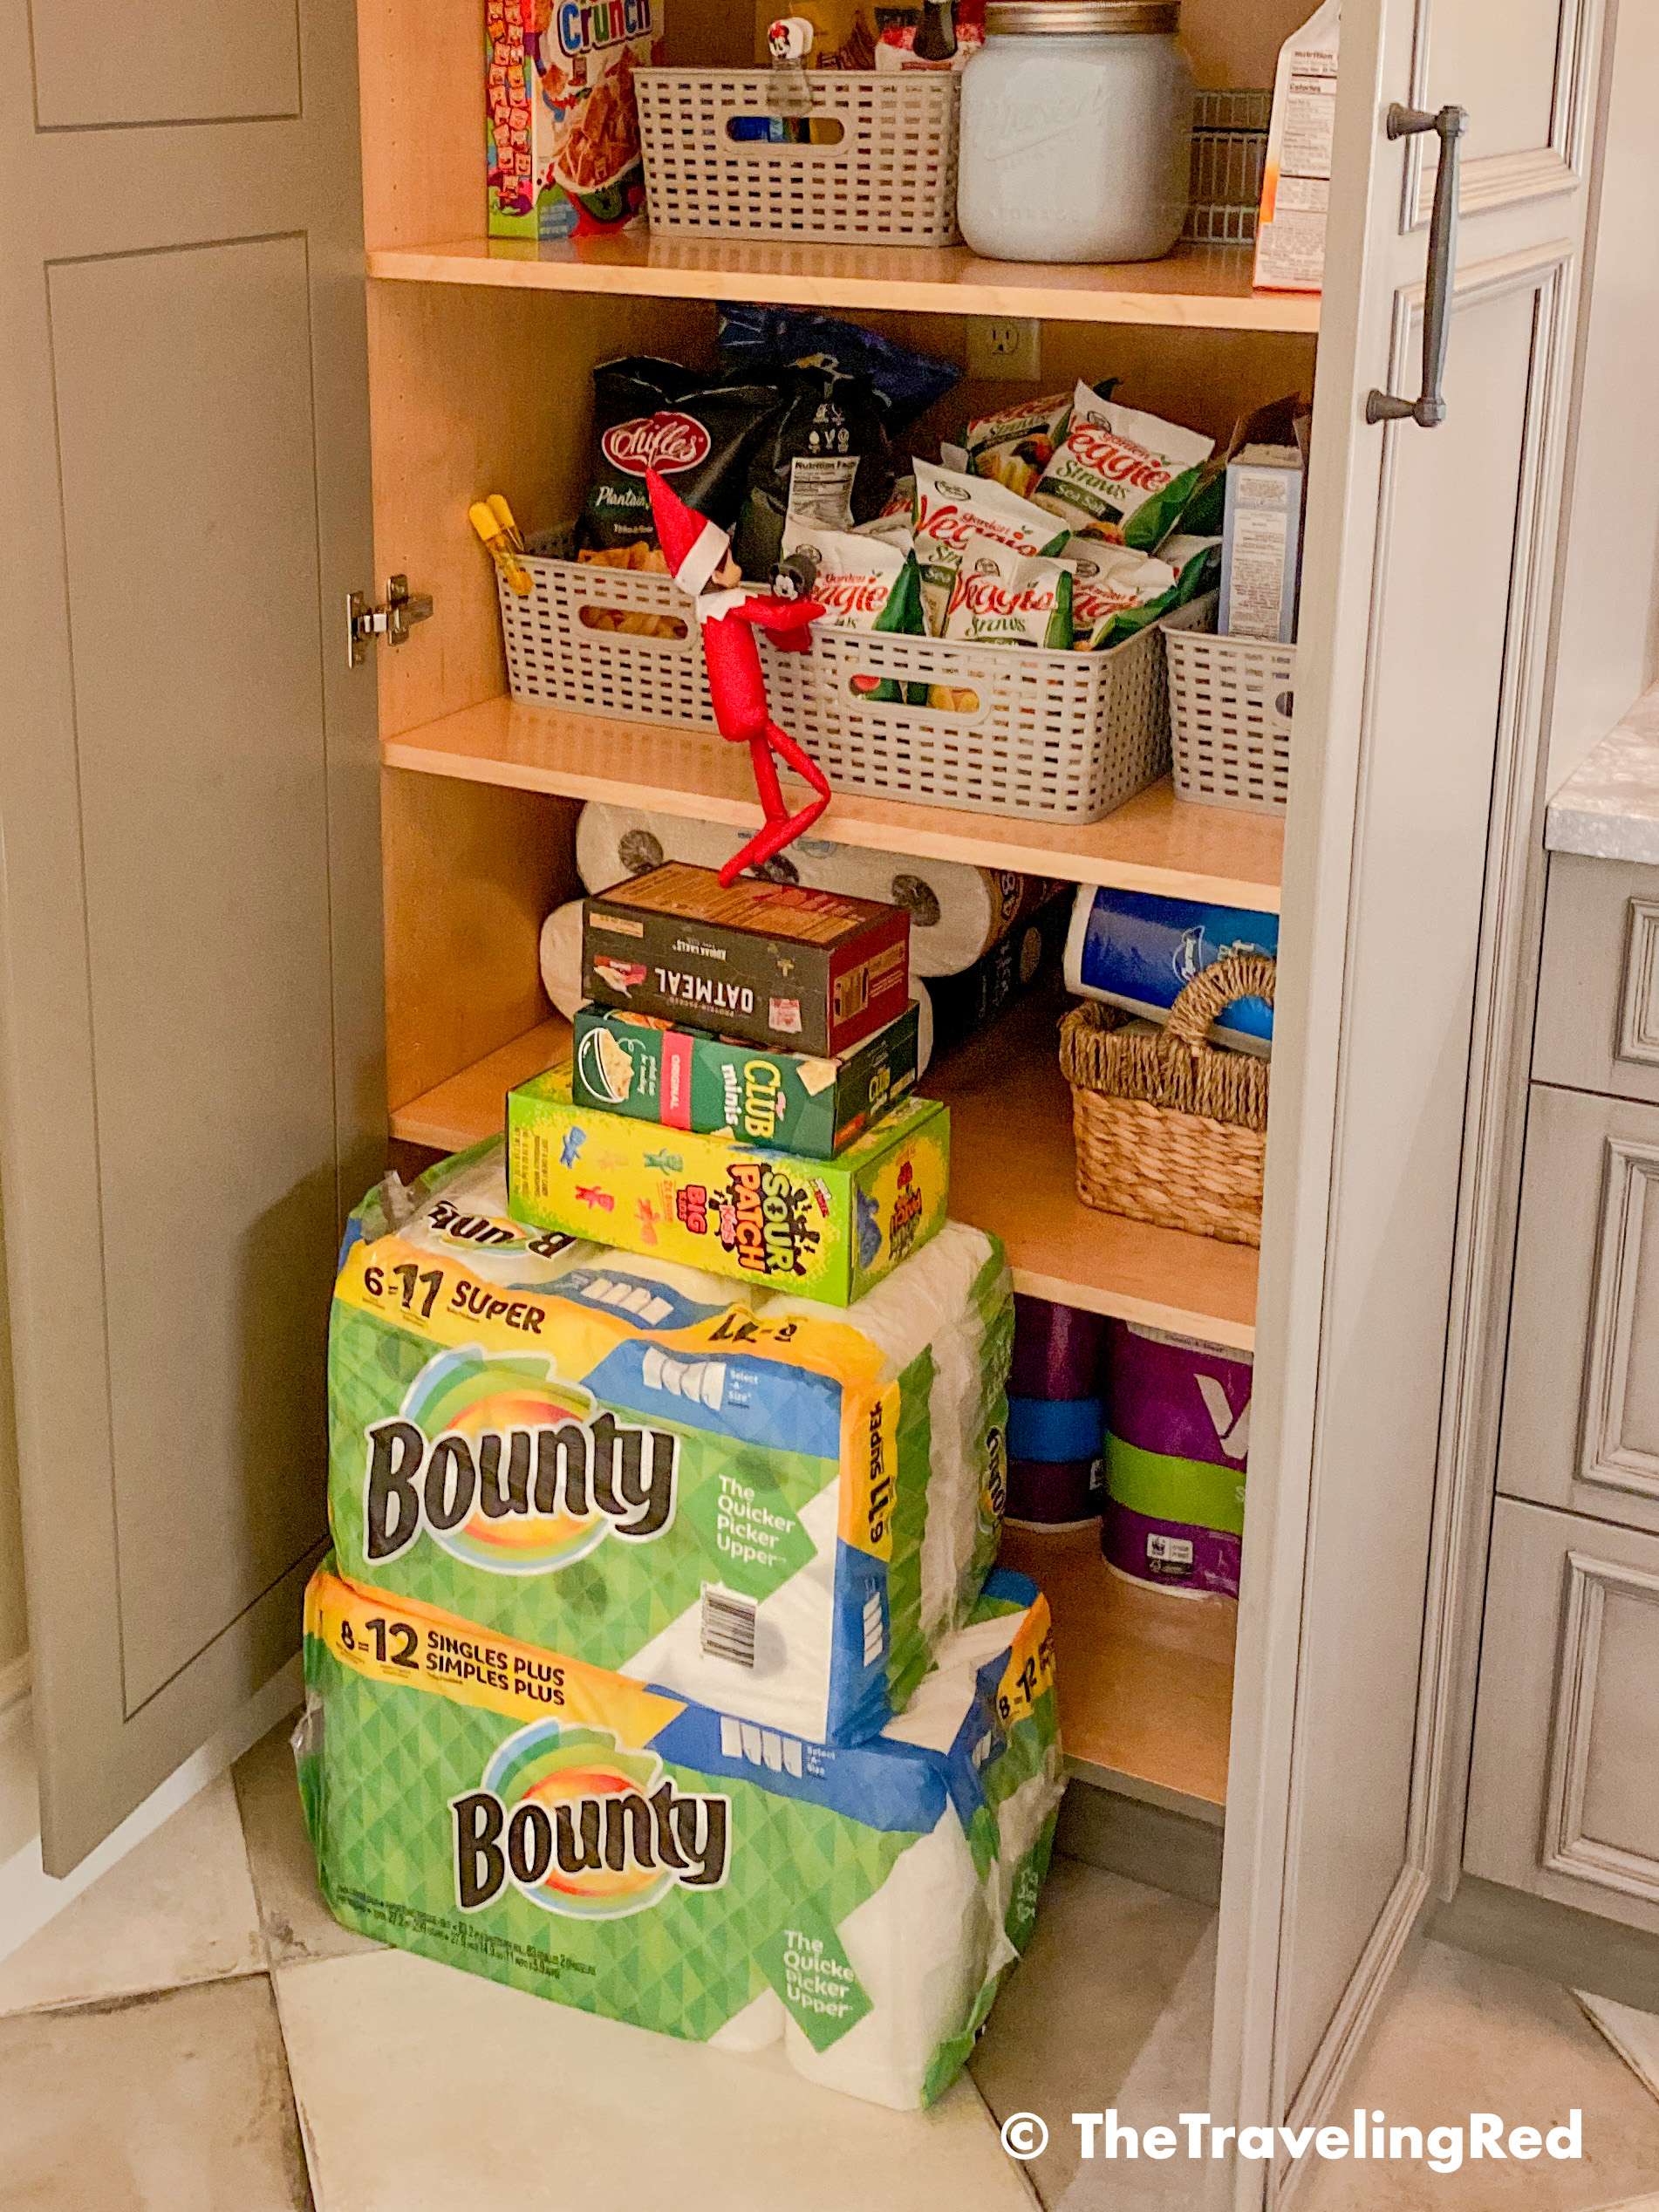 Naughty Elf on the shelf used household items to climb into the pantry to steal snacks. Fun and easy elf on the shelf ideas for a naughty elf that are quick and easy using things you have at home.